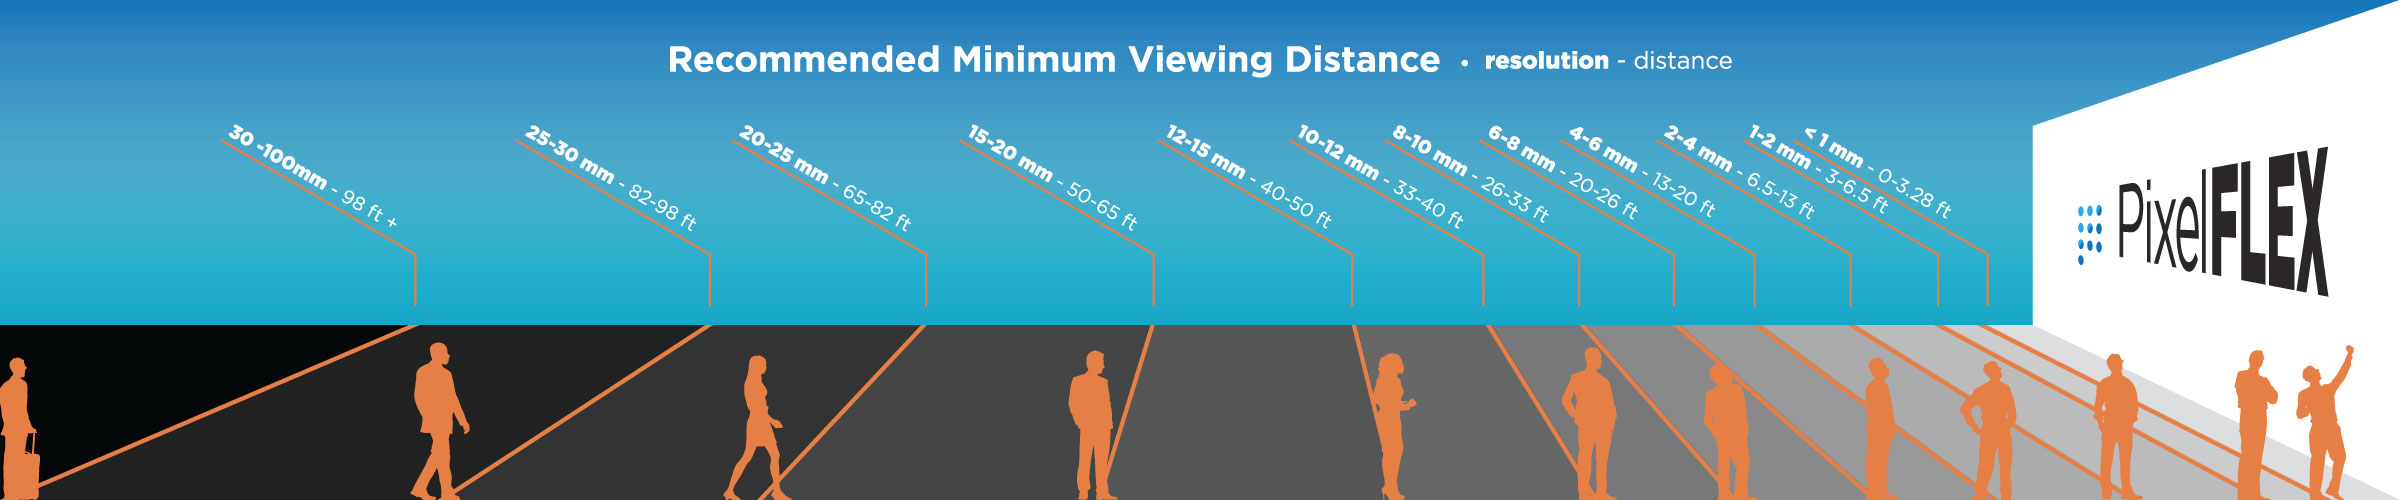 Pixel Pitch Recommendations For Viewing Distances